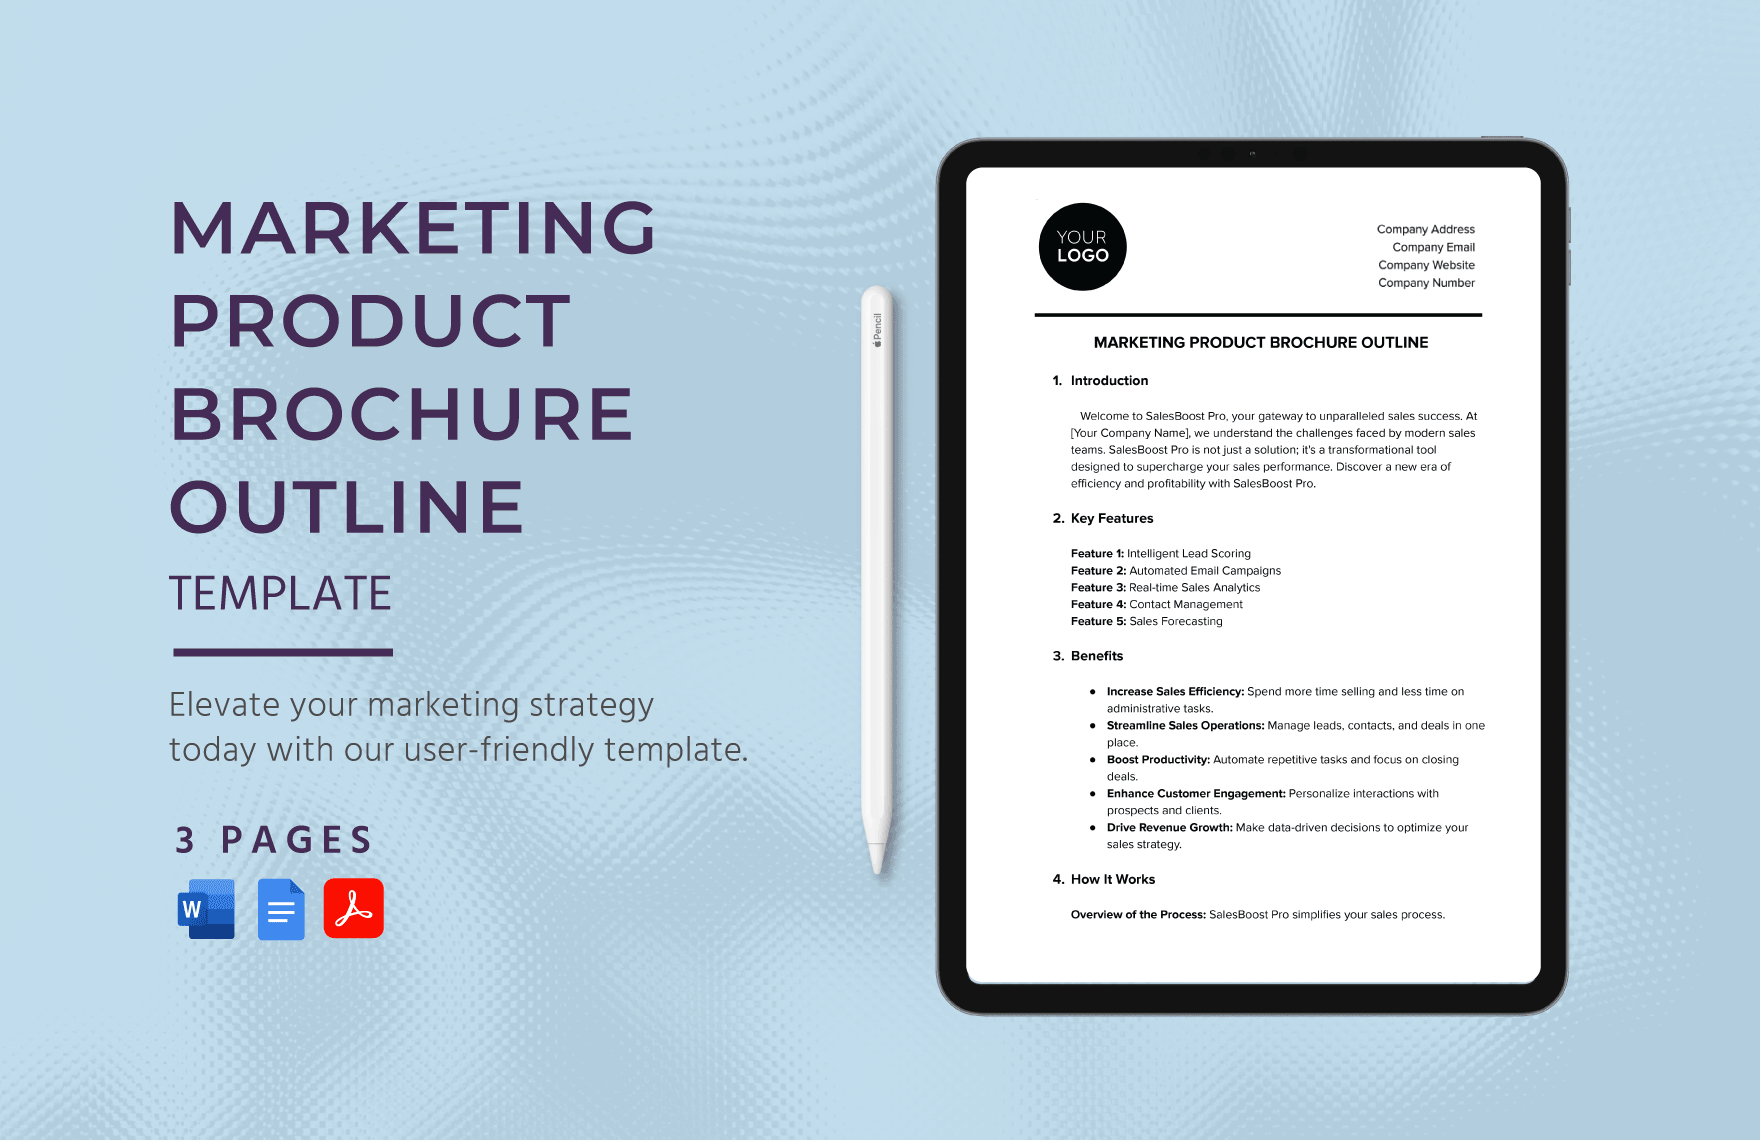 Marketing Product Brochure Outline Template in Word, Google Docs, PDF